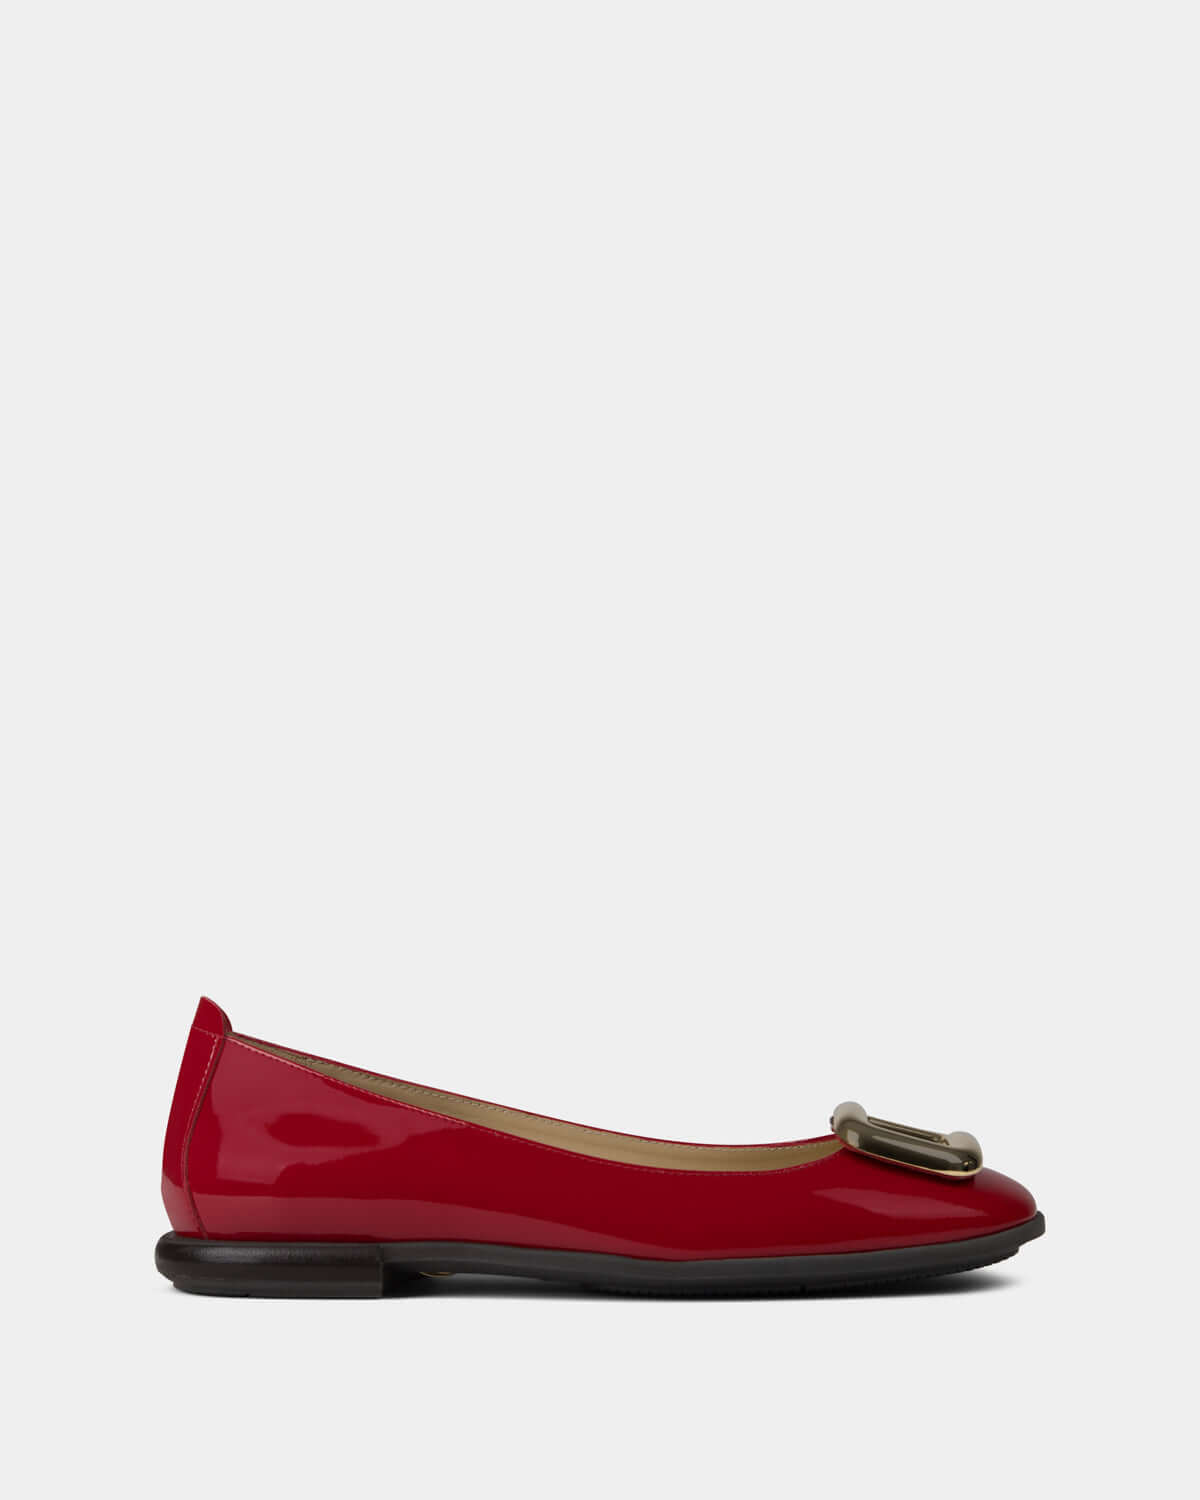 kallú-kallu-red-leather-ballerinas-flats-shoes-made-in-spain-for-women